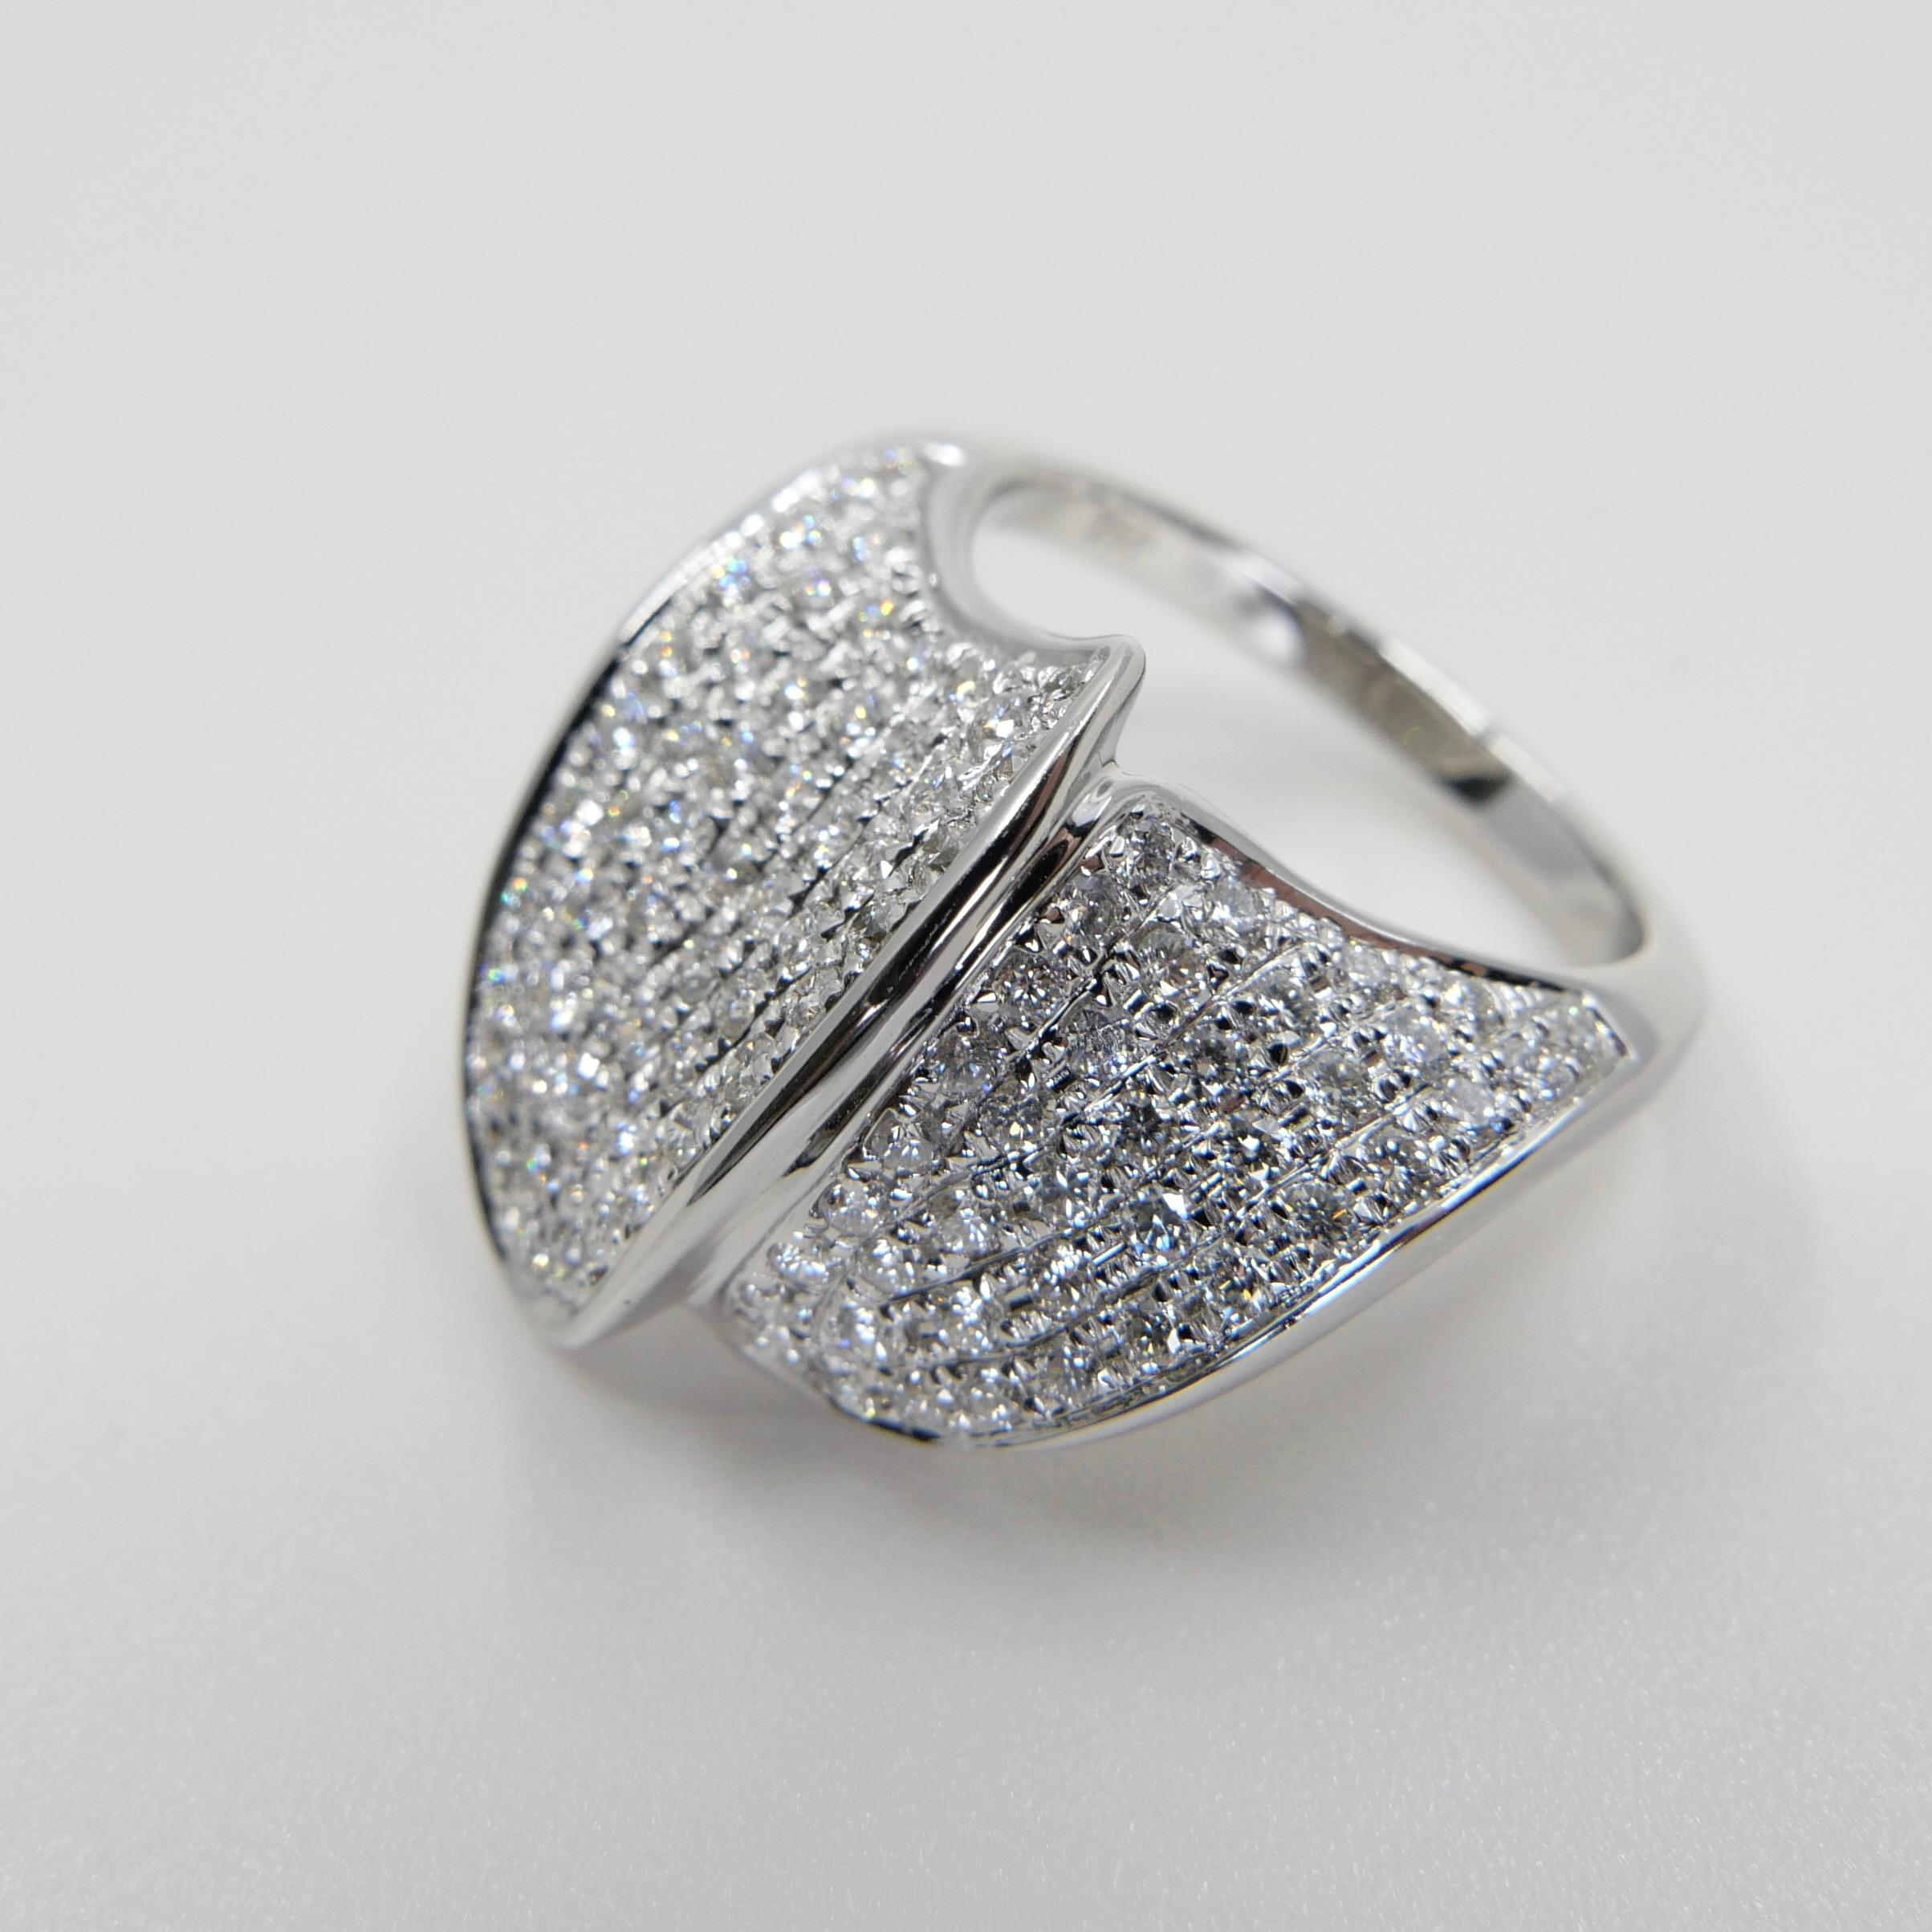 18K White Gold Cluster Diamond Cocktail Ring, 95 Diamonds, 1.07 CTW For Sale 2